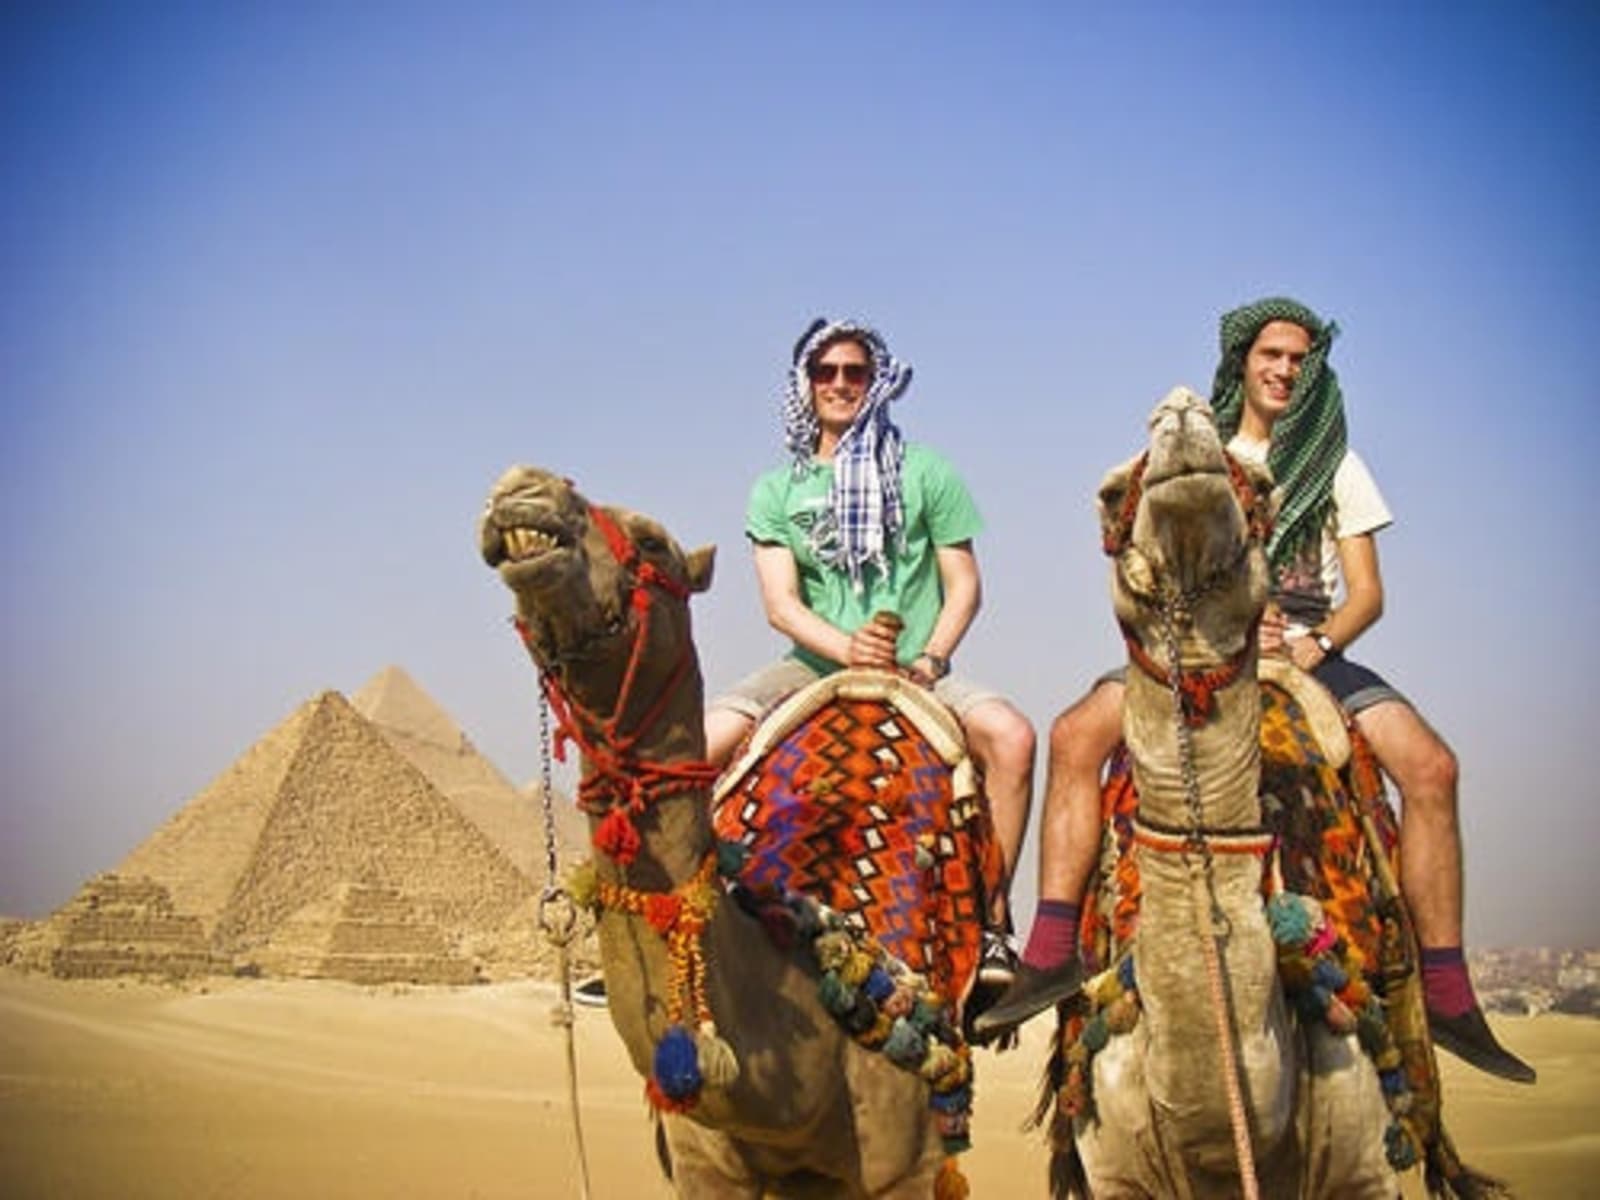 Man and woman riding camels in front of the Pyramids.